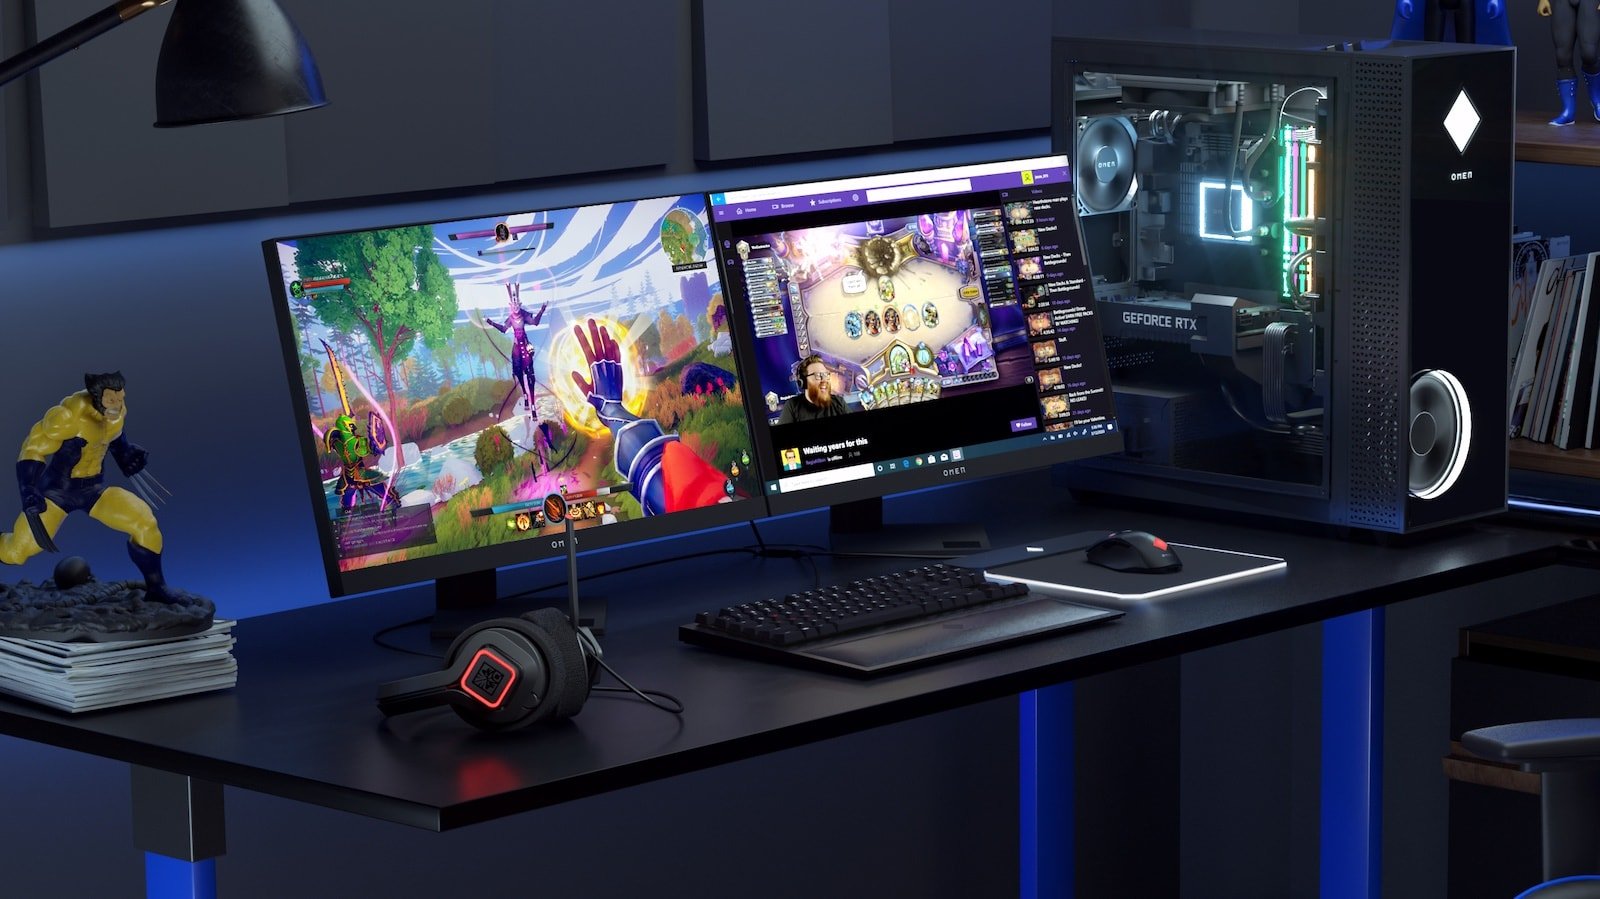 HP OMEN 25i gaming monitor boasts a 165 Hz refresh rate and a 1 ms response for accuracy